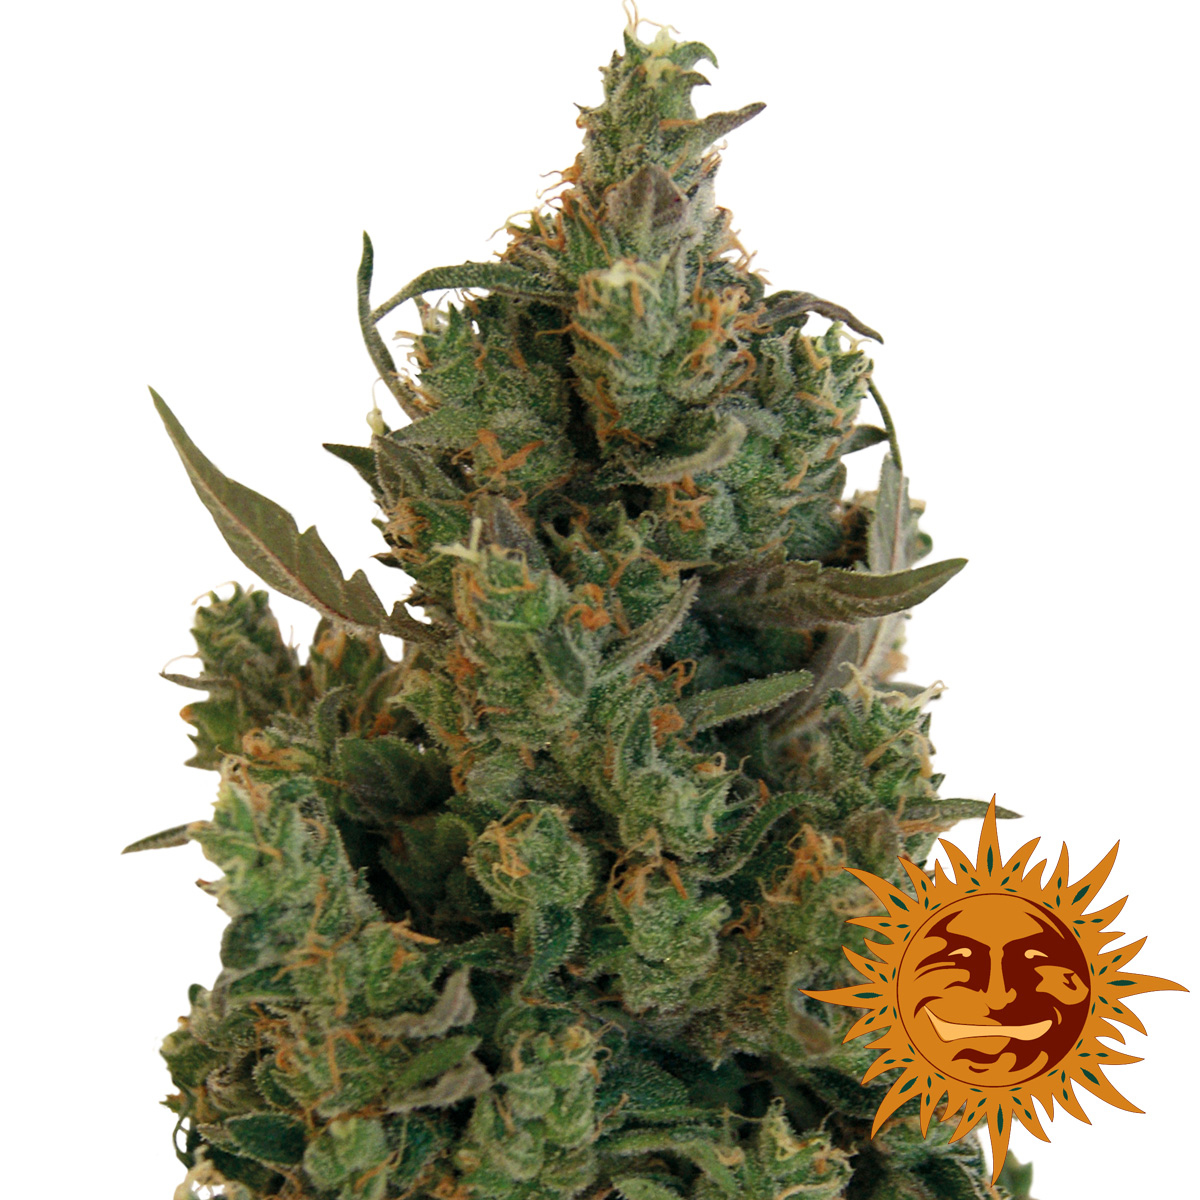 Buy Blue Cheese Feminised from Barneys Farm at Discount Cannabis Seeds